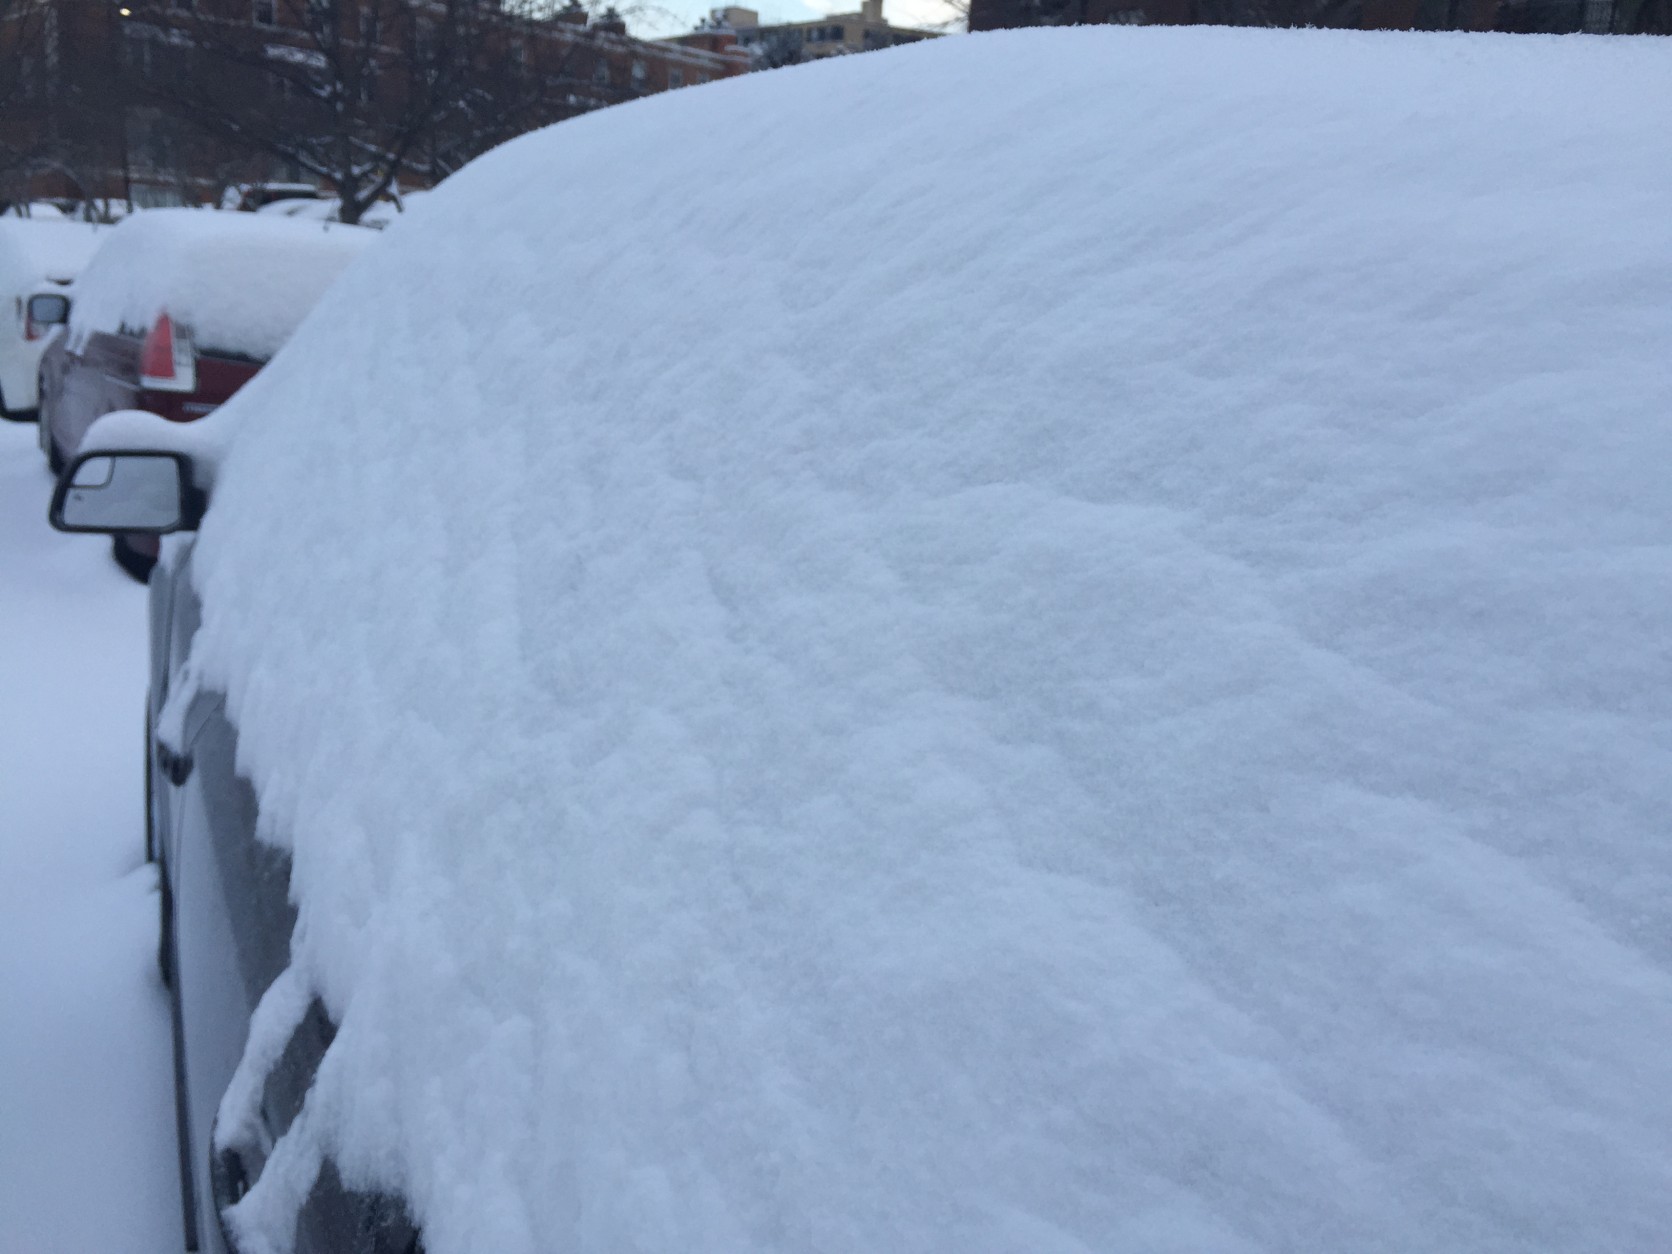 Cars are covered in a thick layer of snow in Northwest D.C. Tuesday morning. (WTOP/Neal Augenstein)